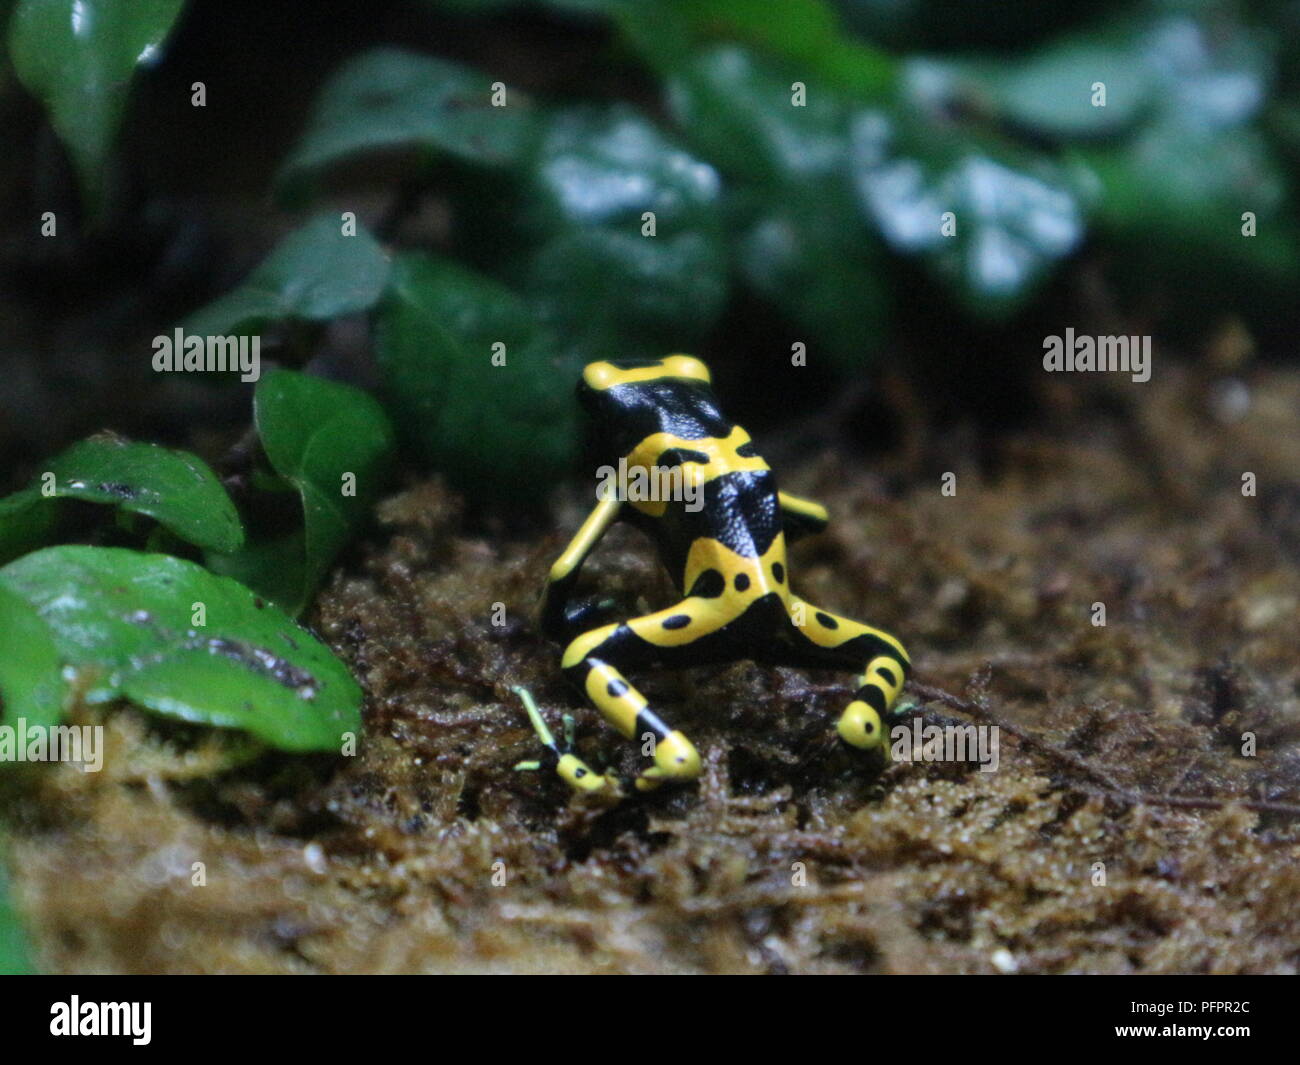 Small Poisonous Frogs Stock Photo